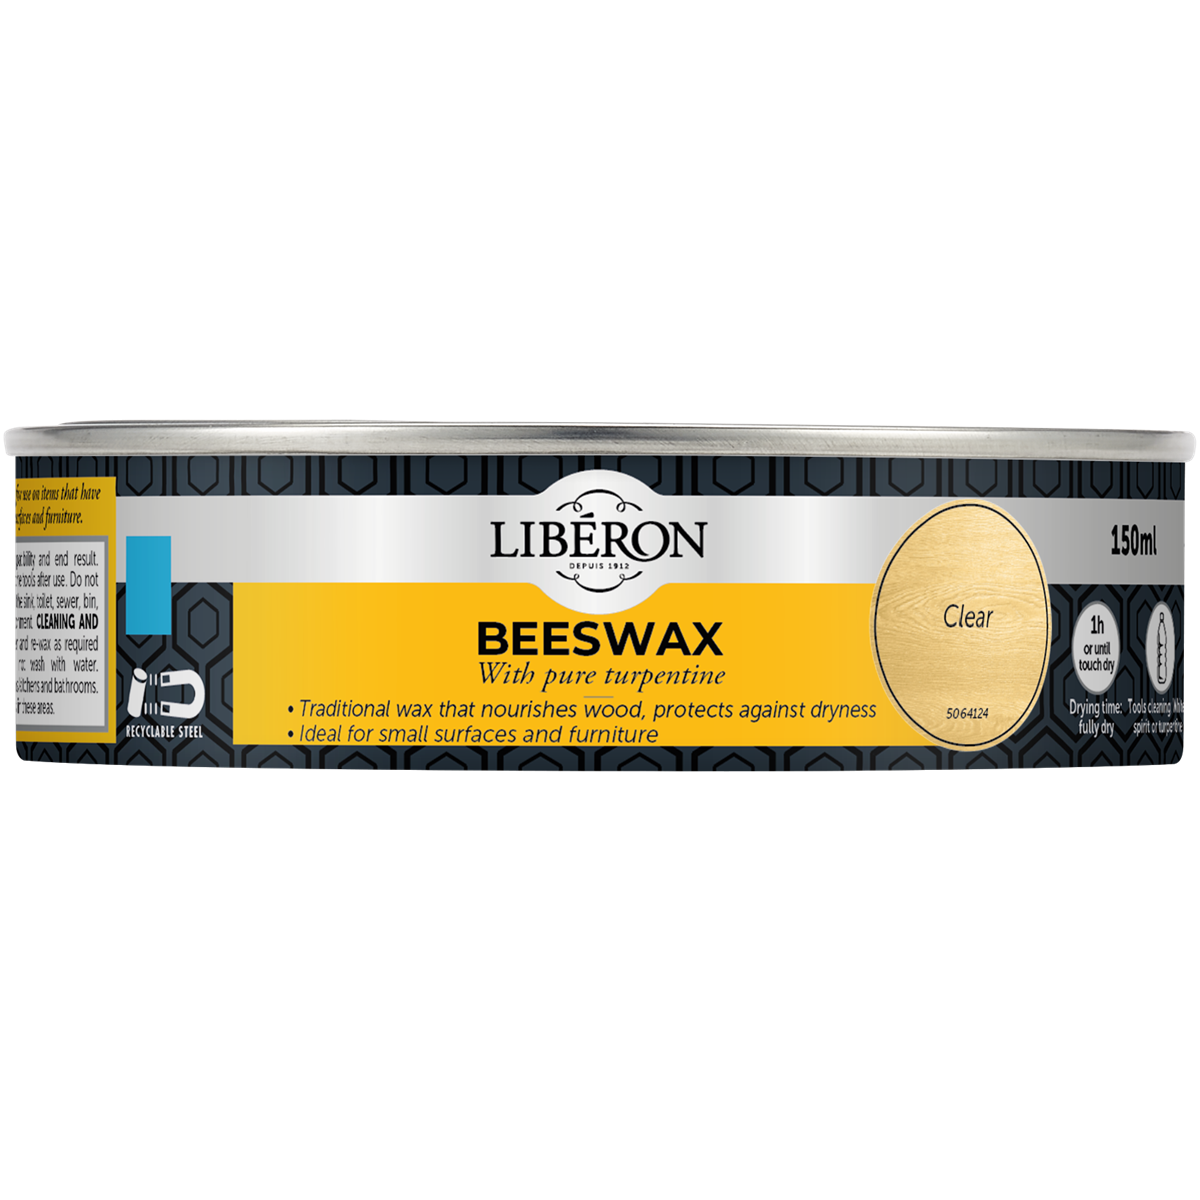 Liberon Beeswax Paste with Pure Turpentine Clear 150ml